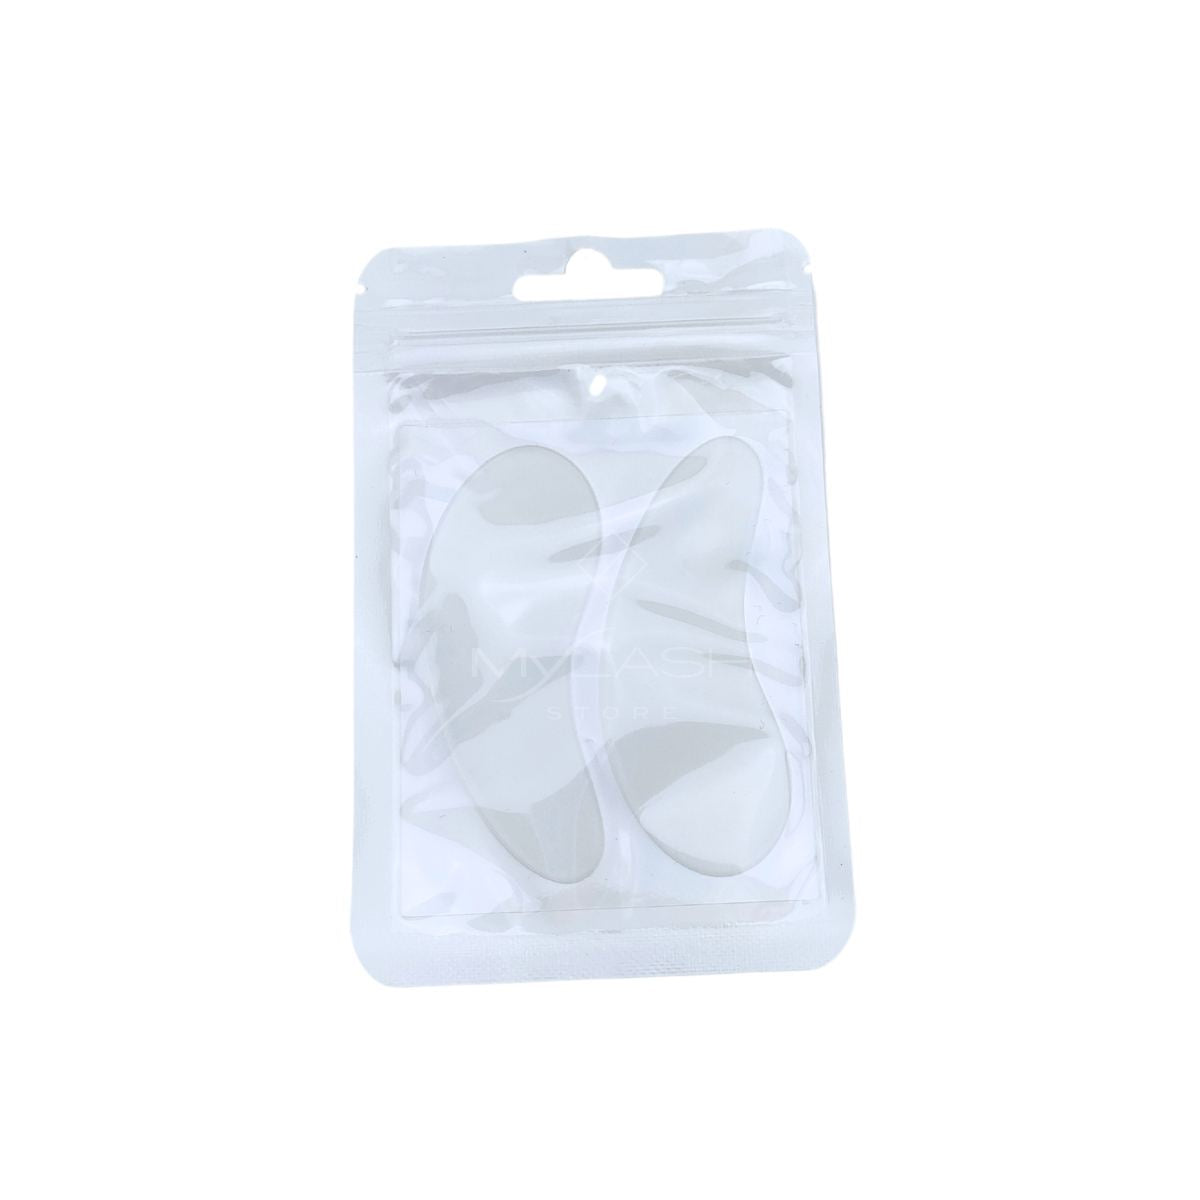 Secure Hold Reusable Silicone Under Eye Pads - My Lash Store